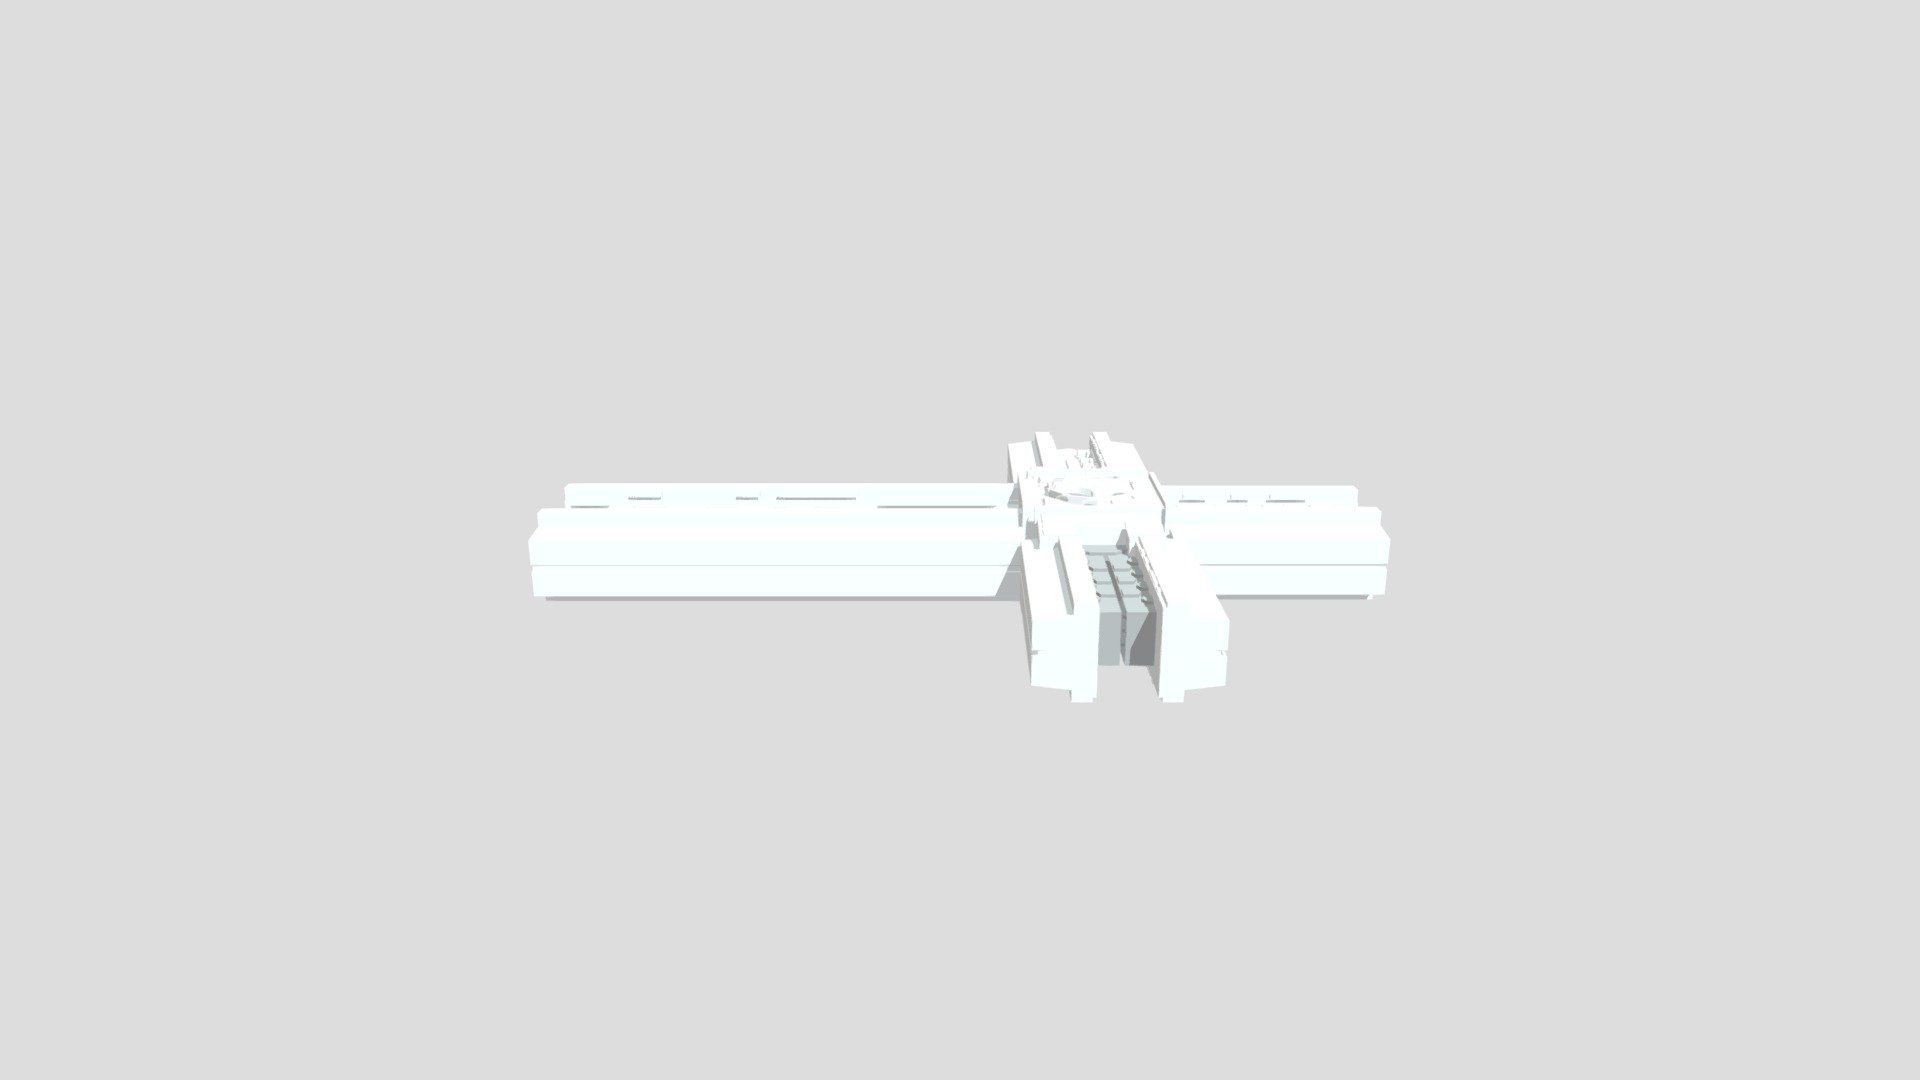 please mention my name if you are gonna use it for some project i would really appreciate if u are yo mention my name thank you - Punisher from trigun stampede - Download Free 3D model by Howling.Wolf 3d model